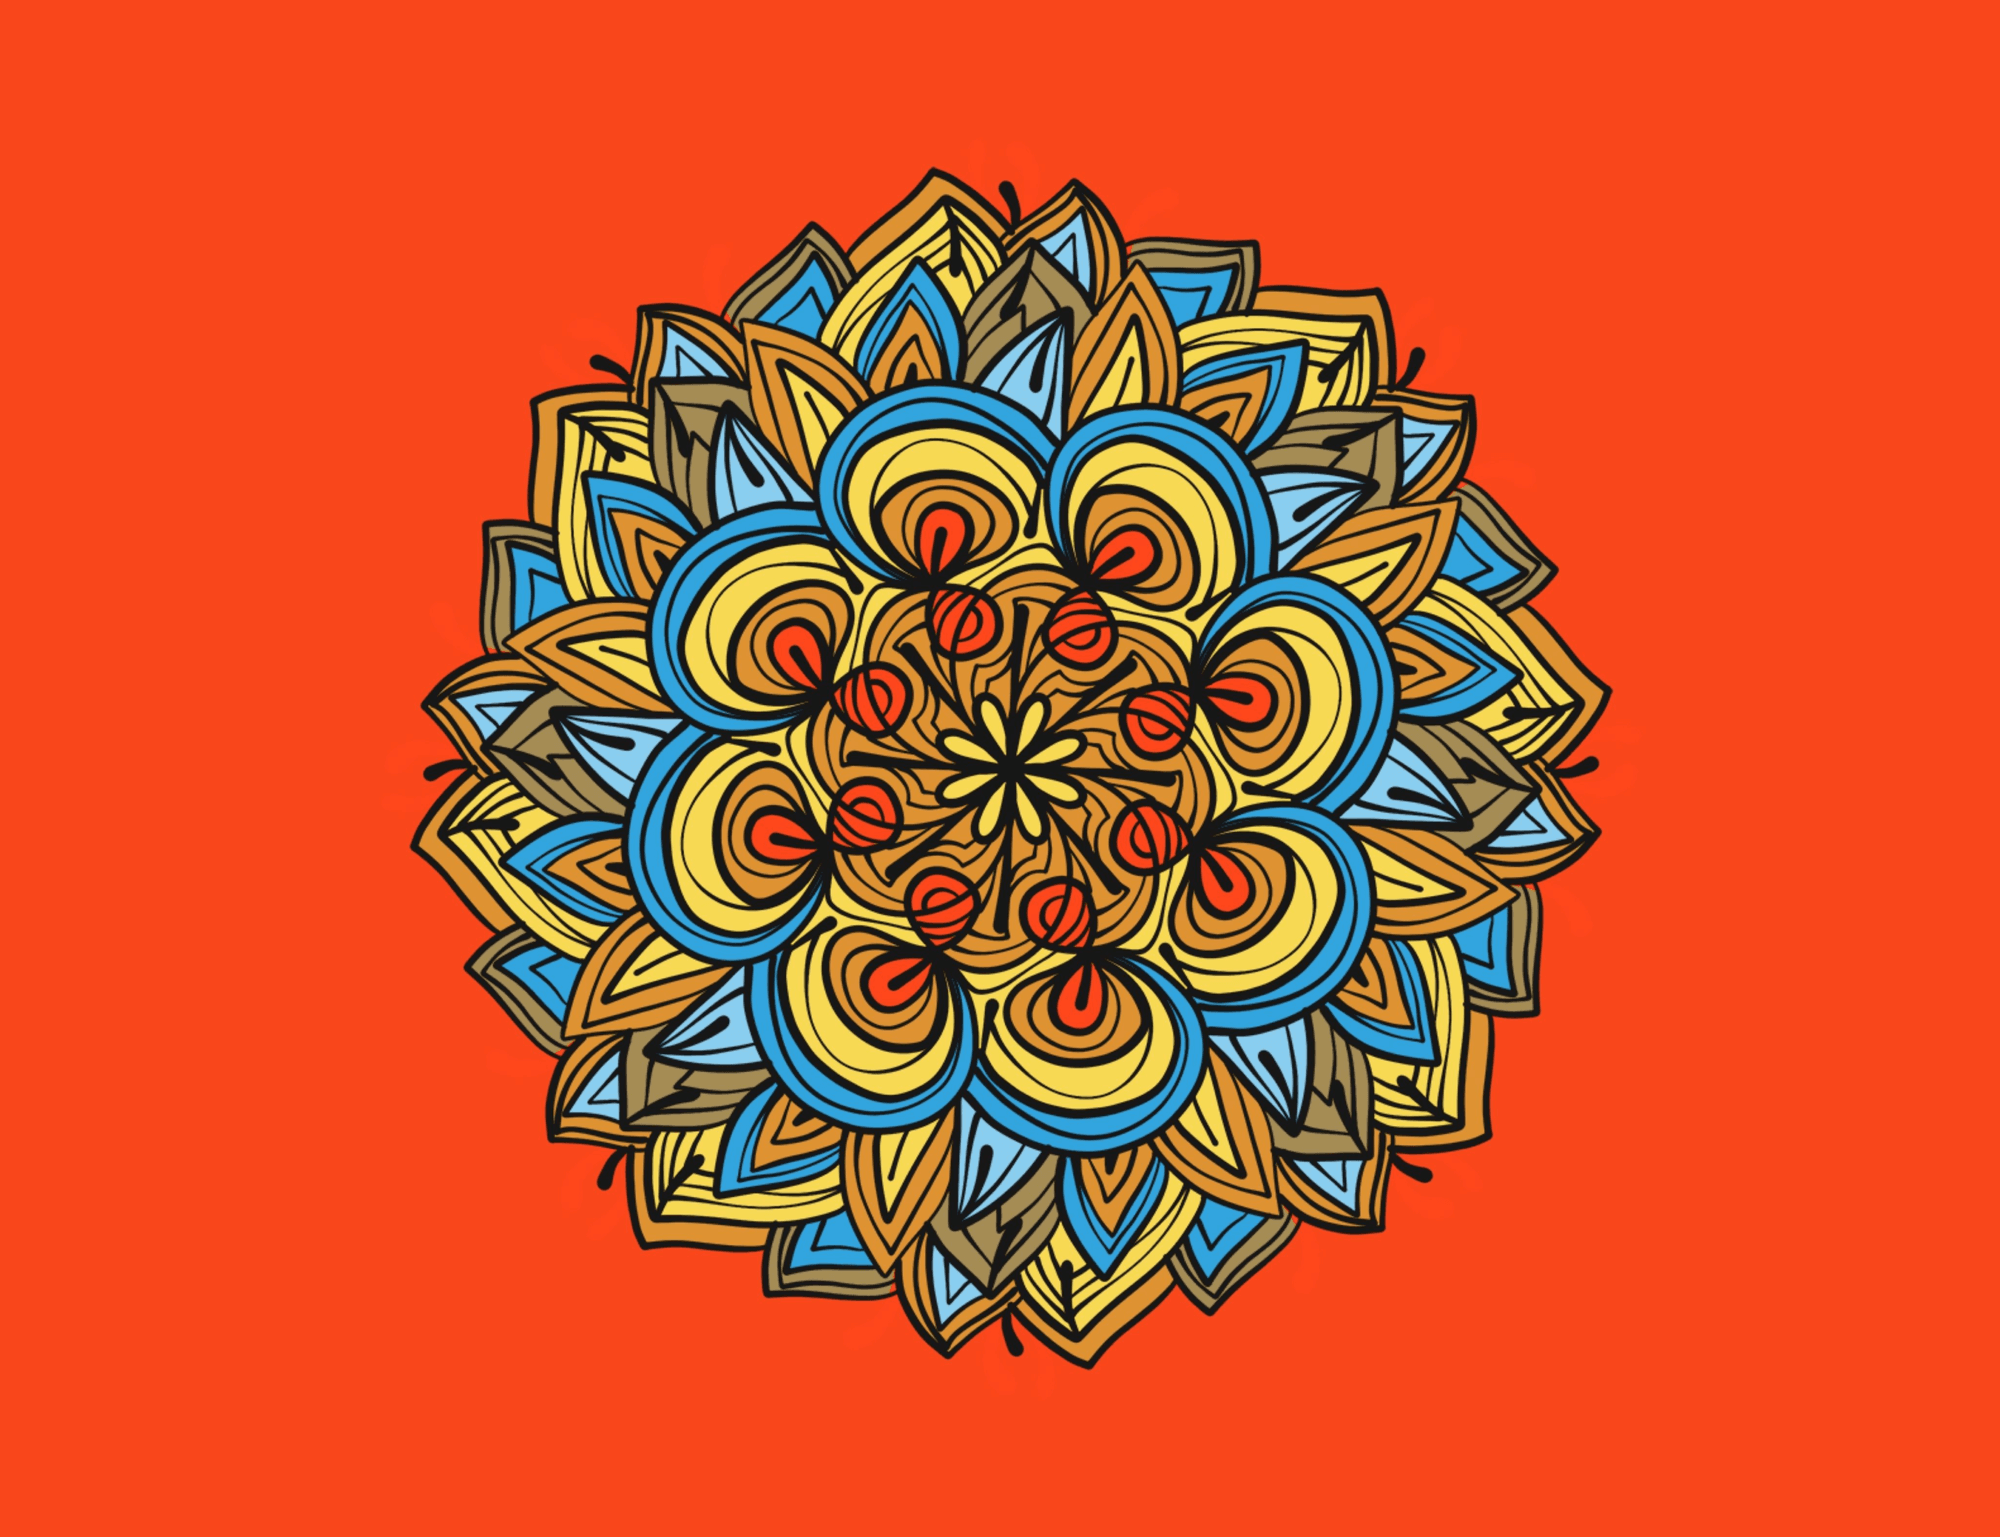 Mandala Color by Number For Adults Printable: An Adult Coloring Book with  Fun, Easy, and Relaxing Coloring Pages. by Emely Nuitty